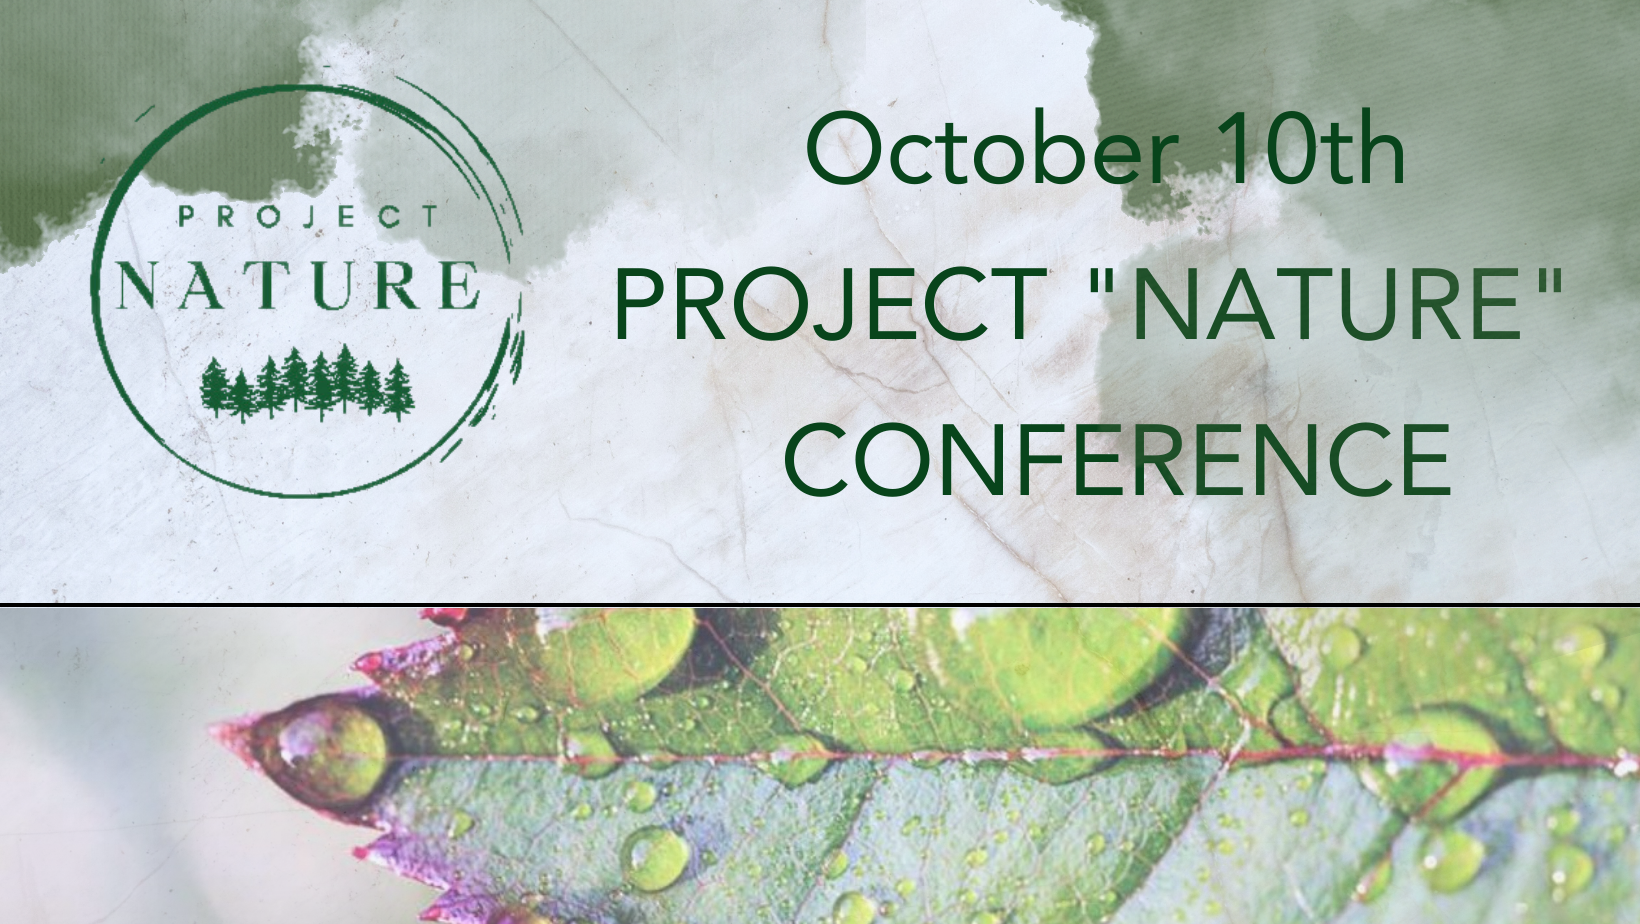 LCC organizes NATURE project conference